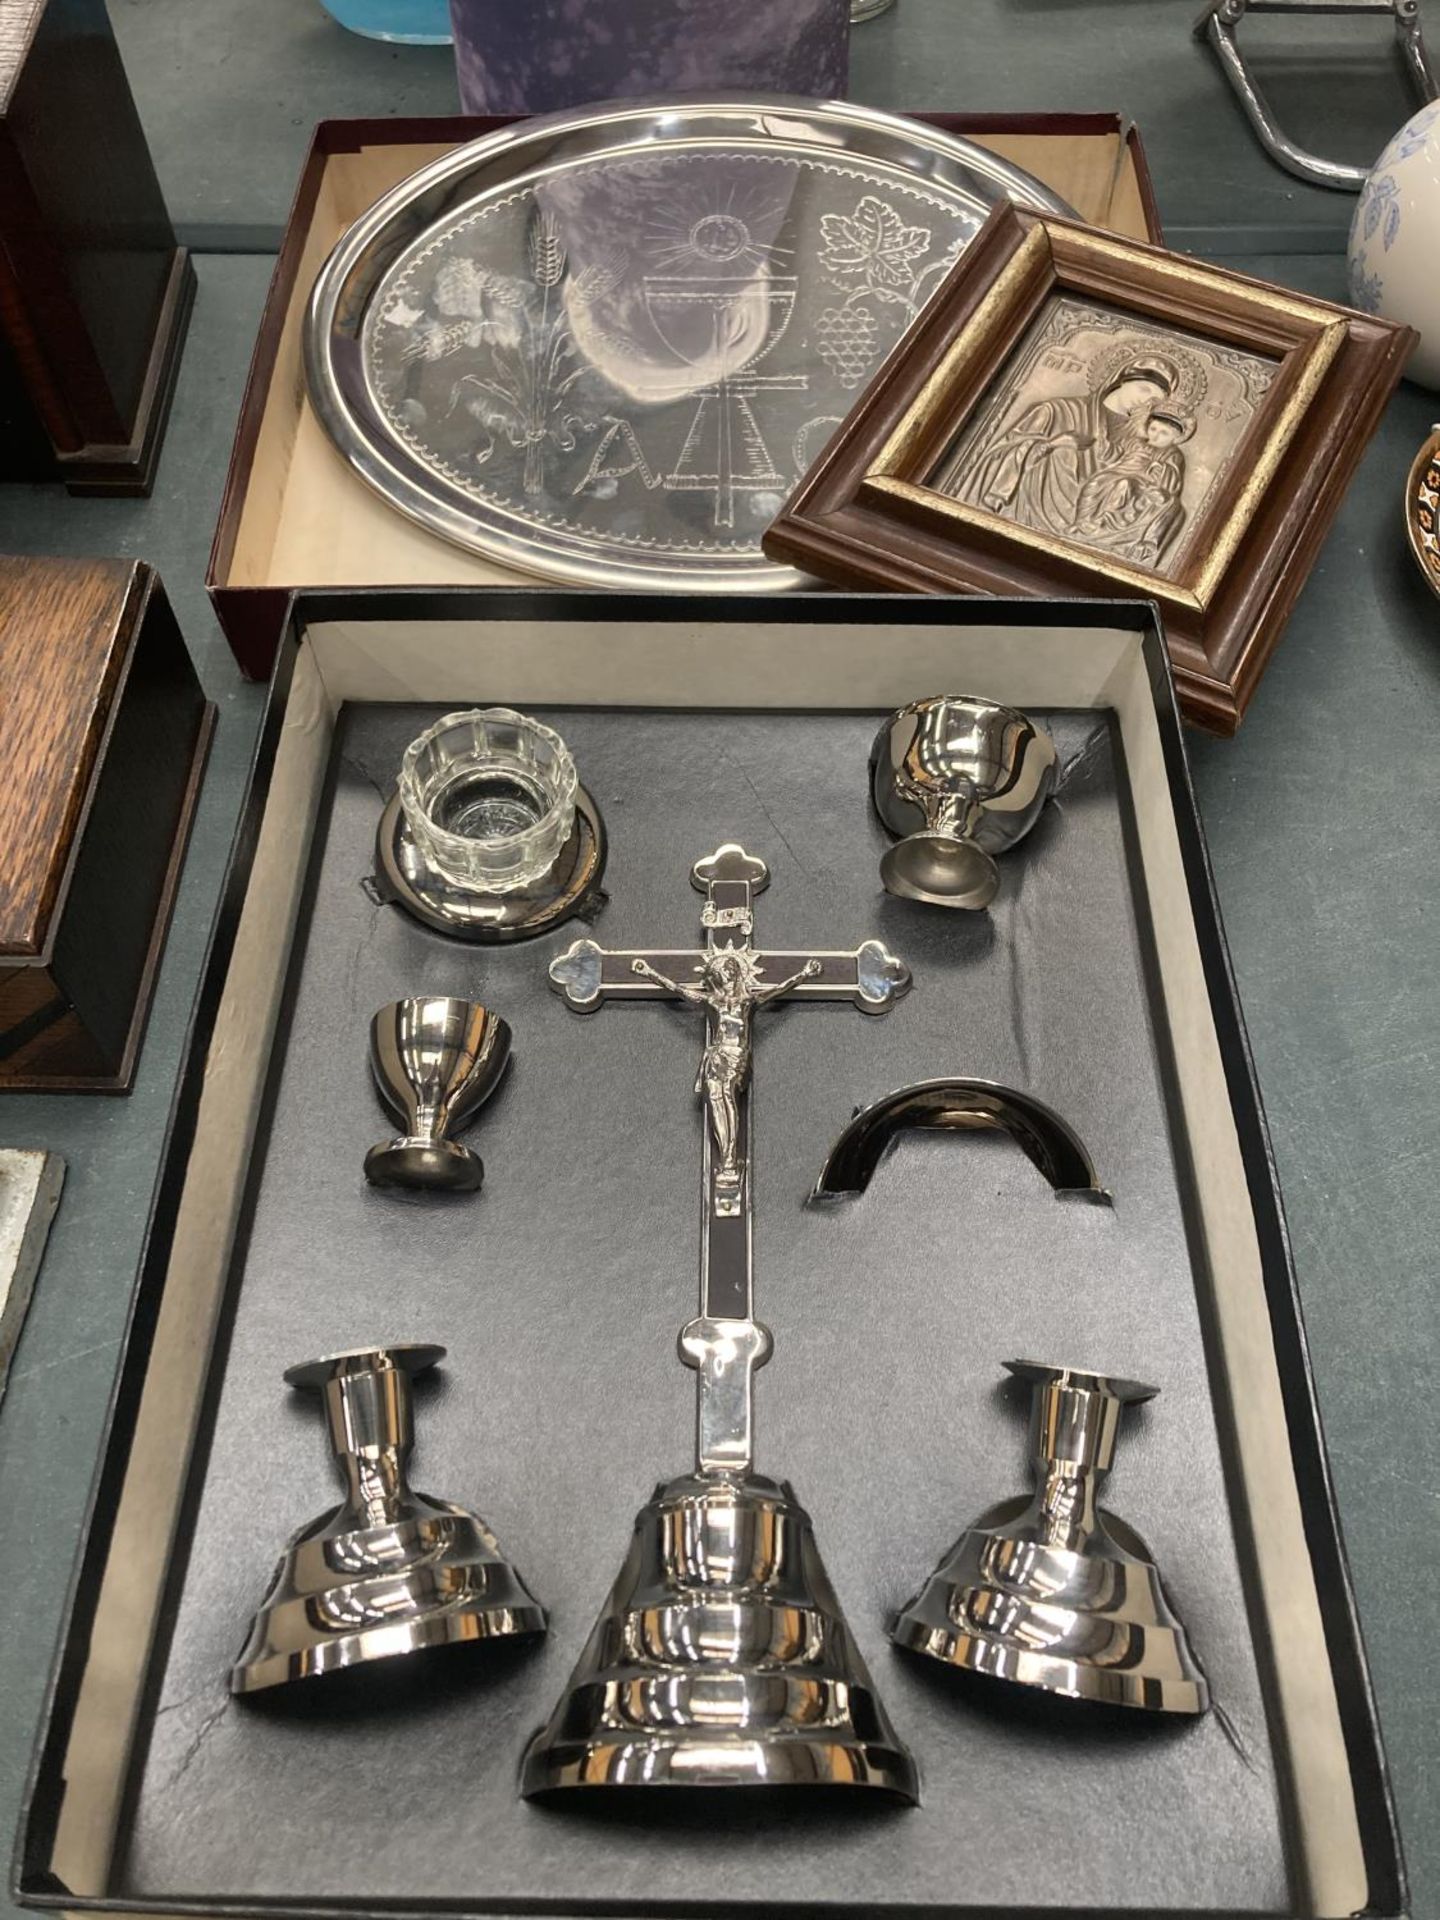 A VINTAGE BOXED SILVER PLATED PORTABLE COMMUNION SET AND A RELIGIOUS ICON